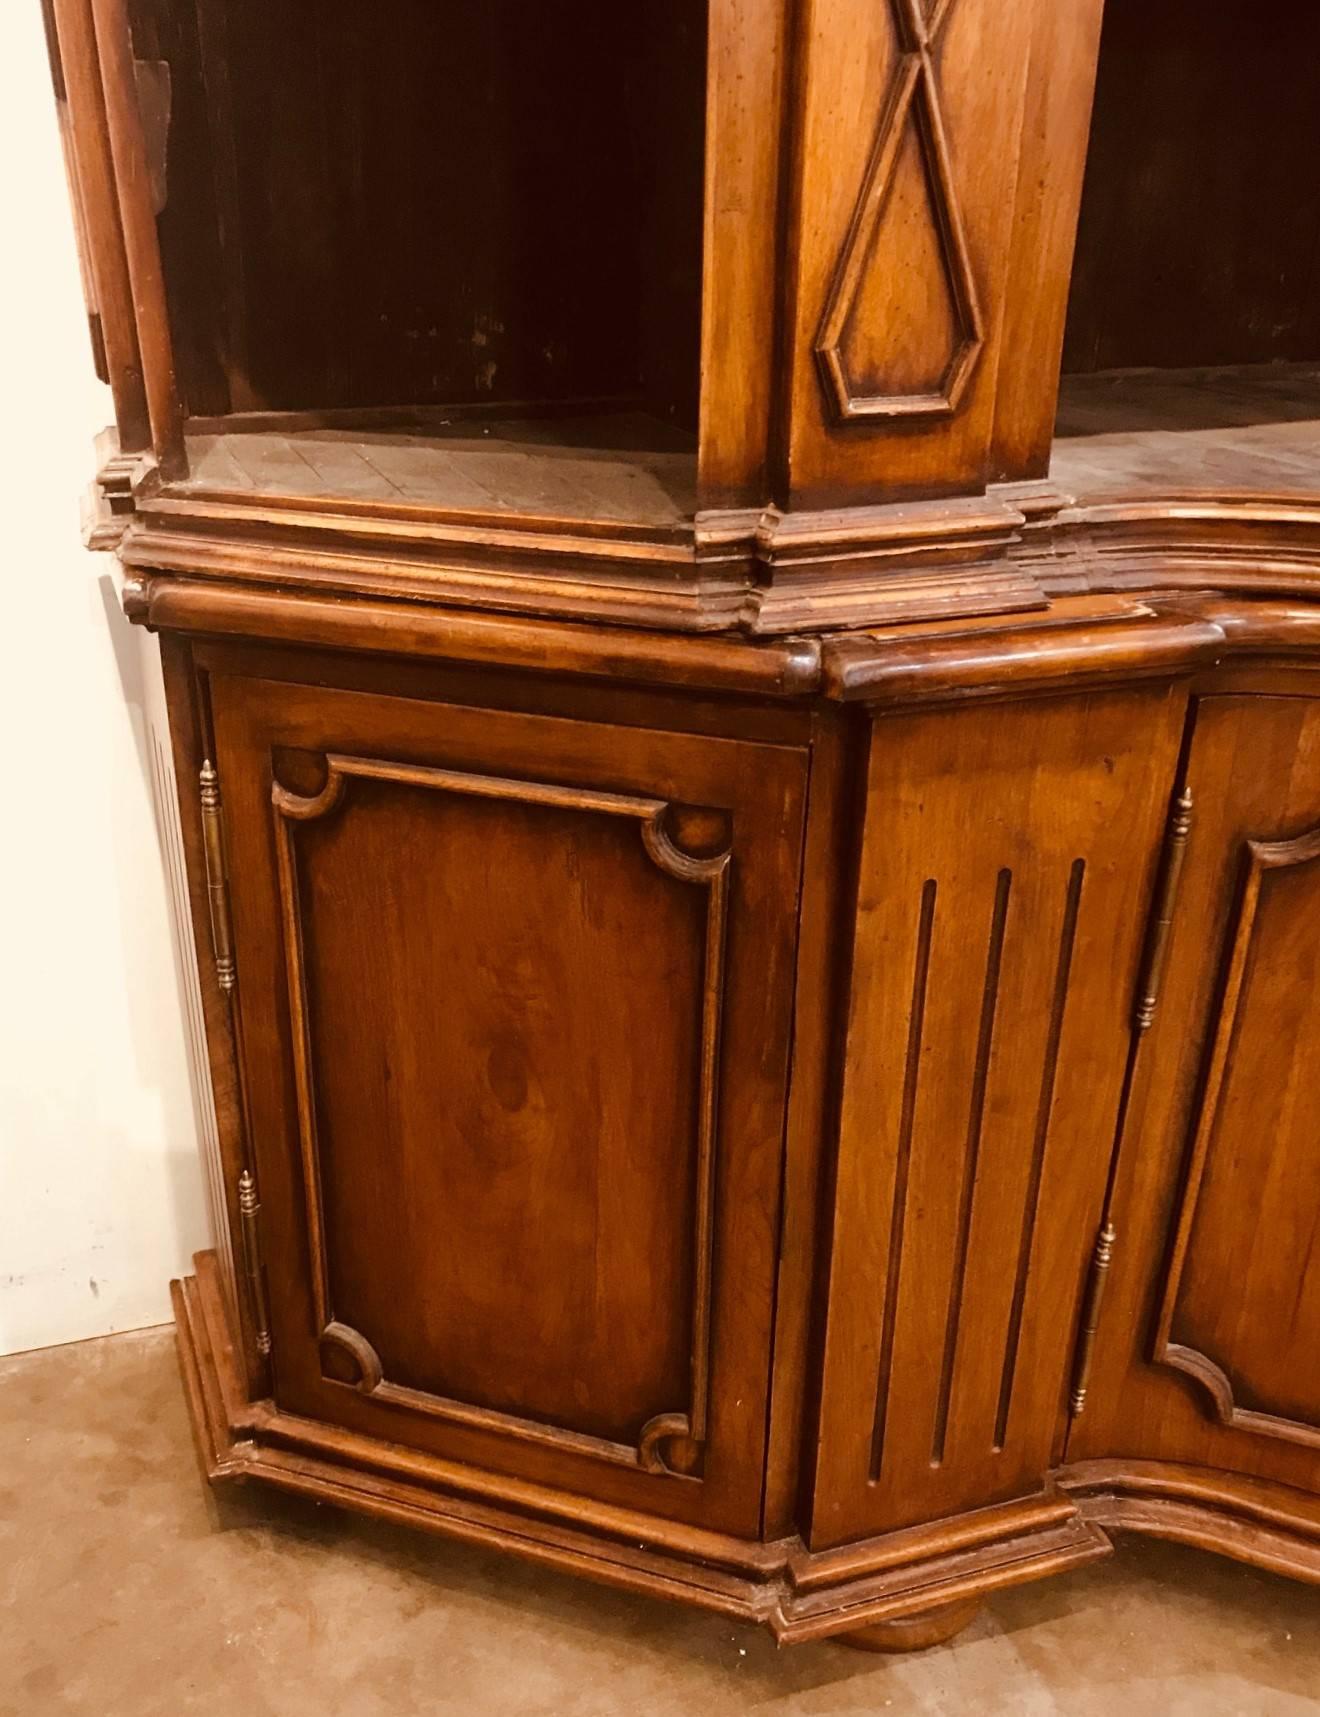 Impressive large custom crafted Italian Tuscan style walnut bookcase cabinet.

The beautifully shaped and contoured cornice above open shelving and facings with diamond shaped trim and shell and leaf carved accents. The shaped lower section with